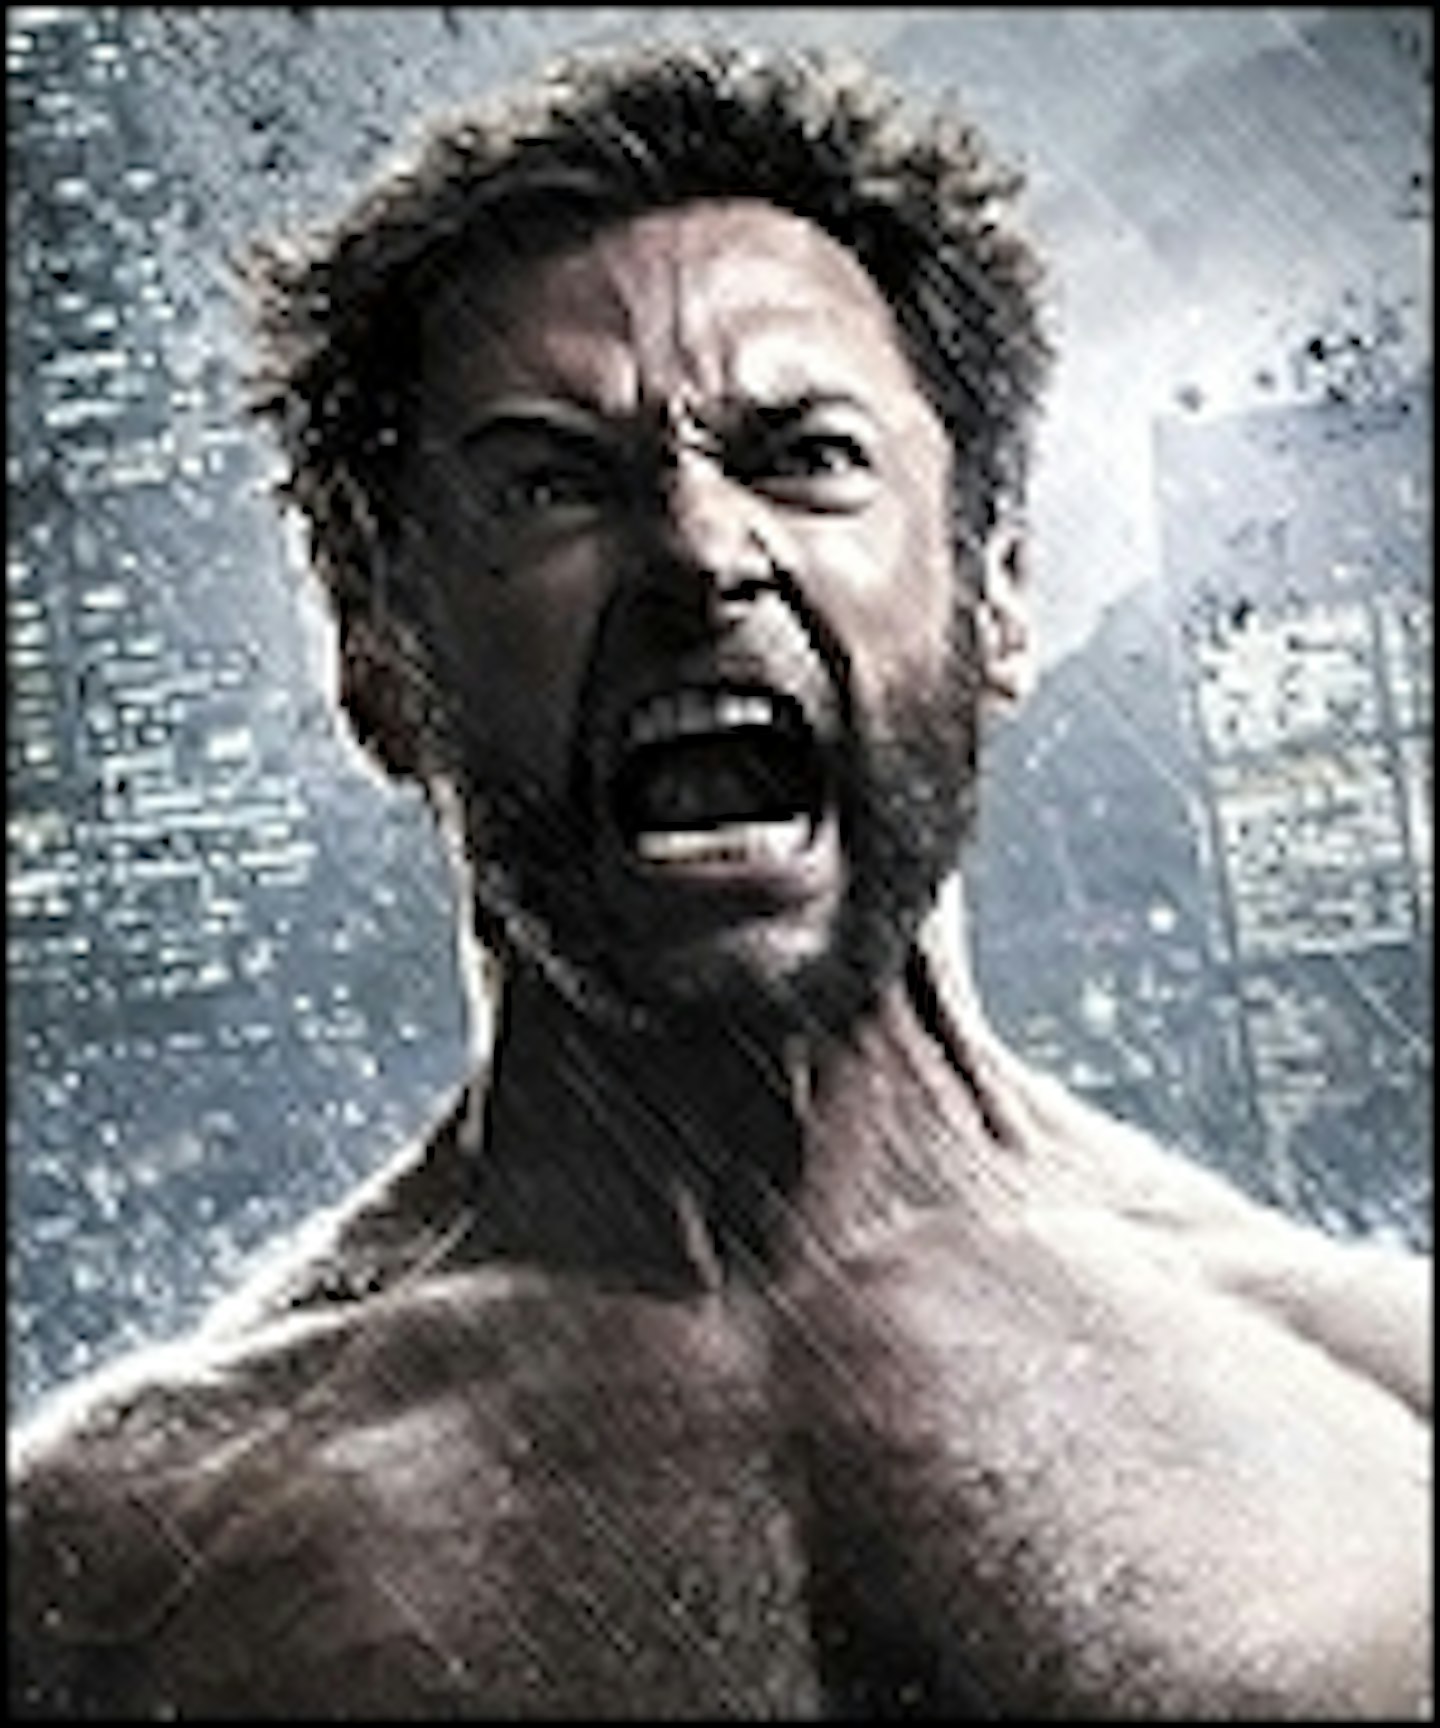 Two New Wolverine Posters Scream In